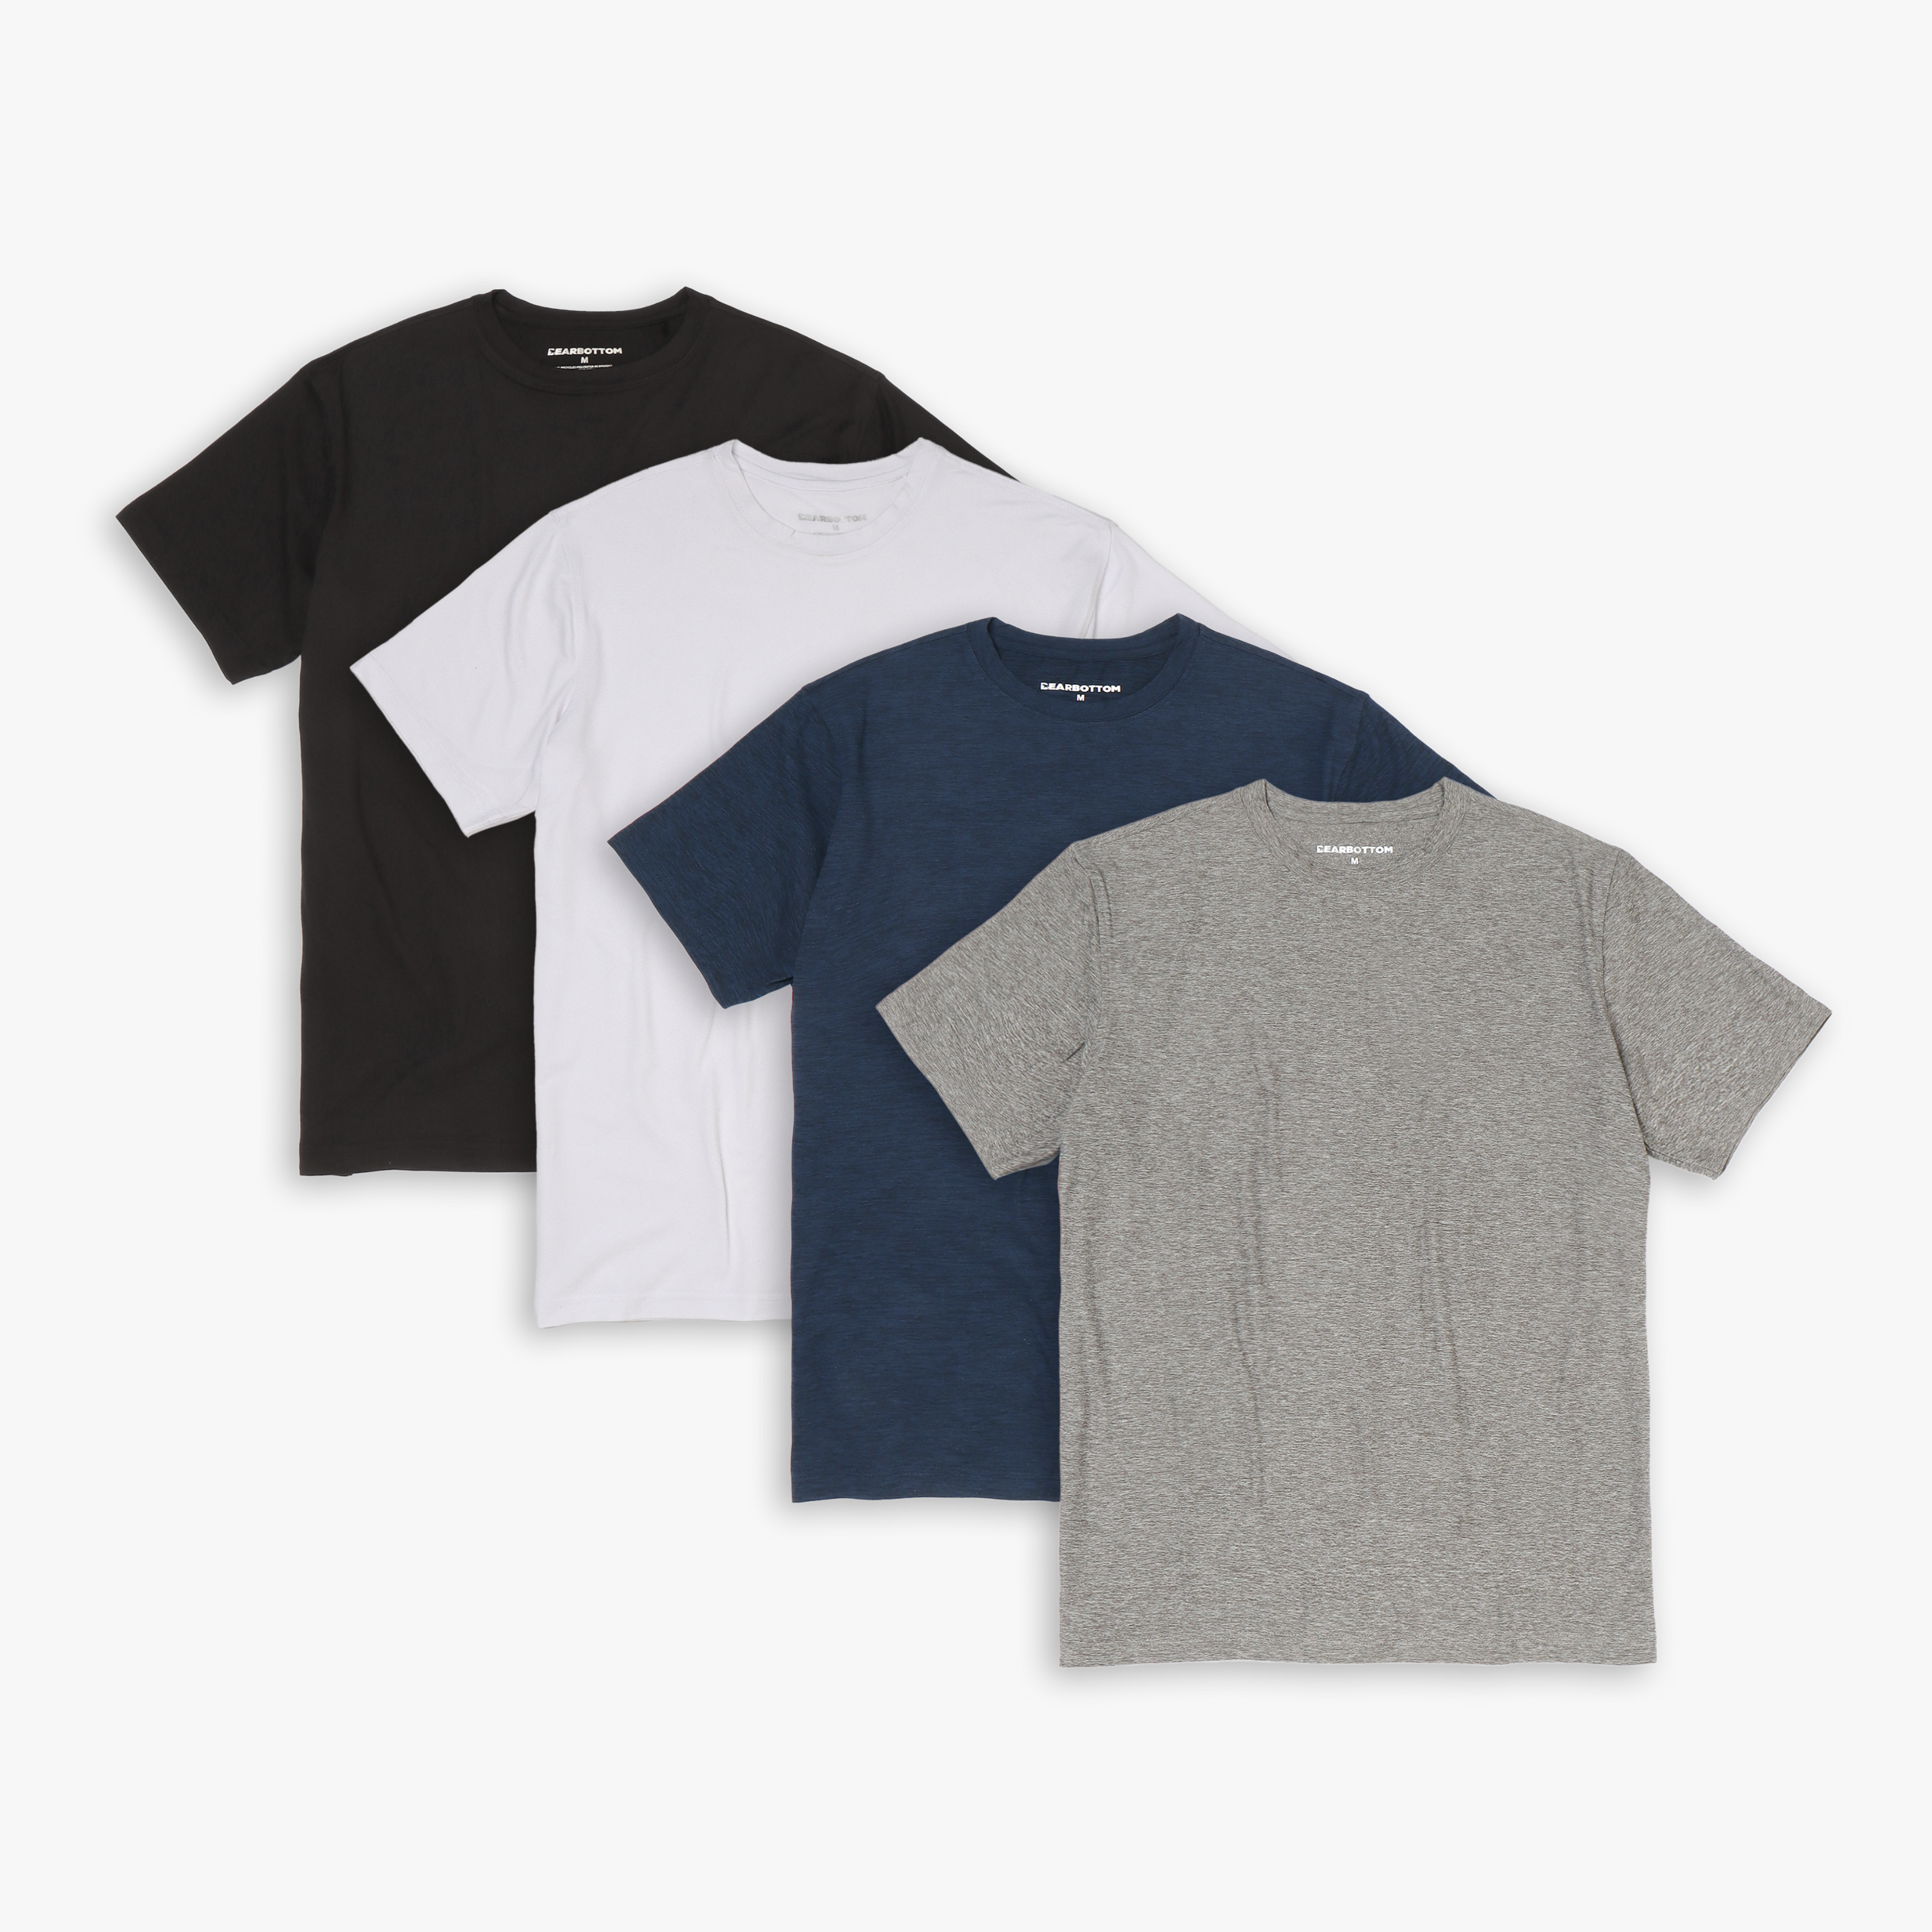 Short Sleeve Tech Tee Grey, Navy, Solid White, Solid Black